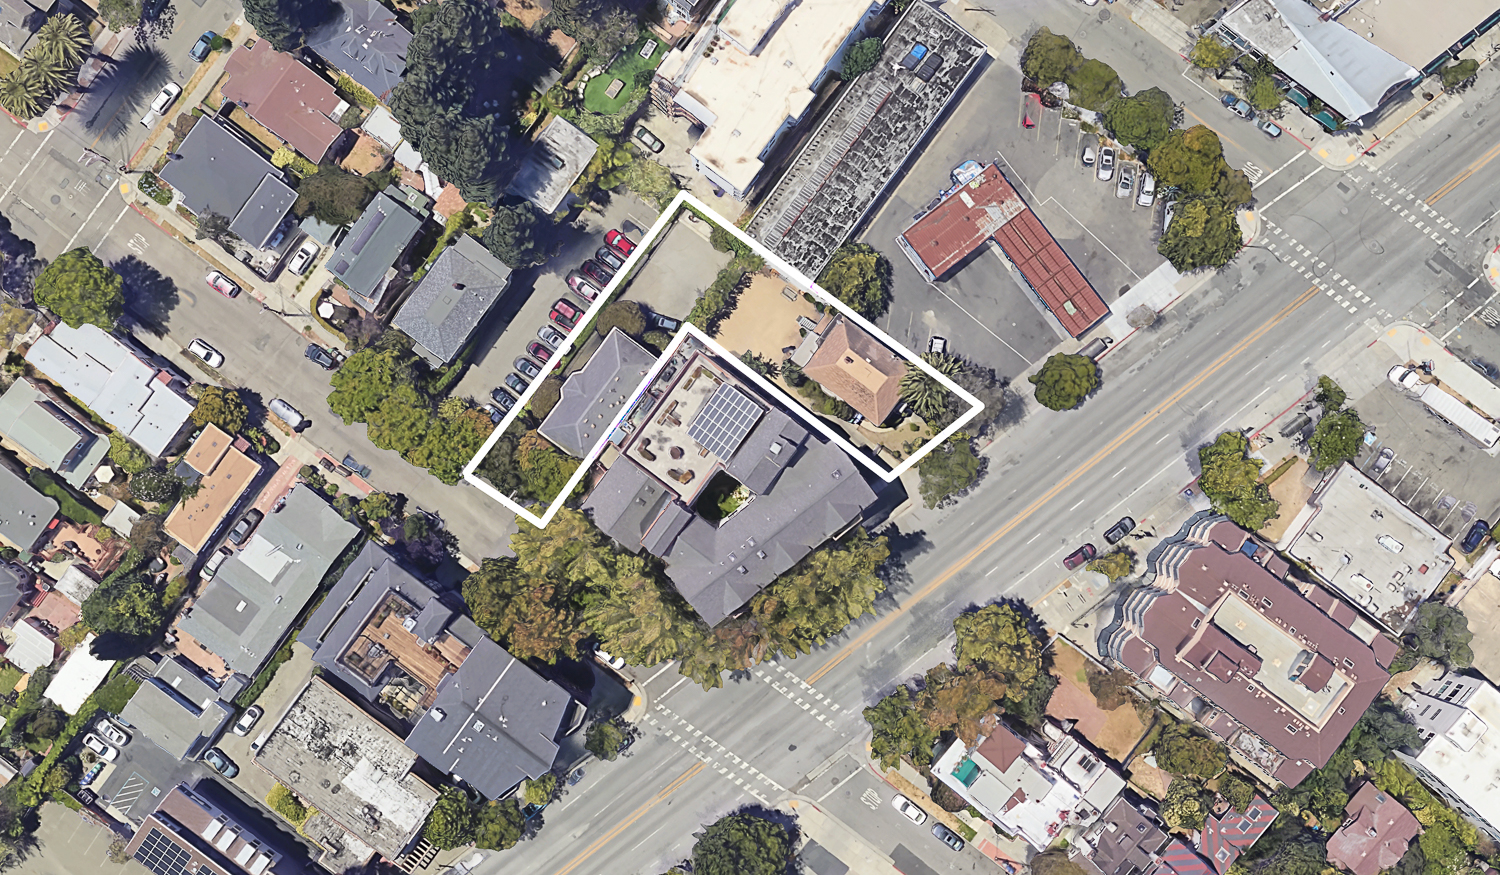 2614 Telegraph Avenue outlined roughly by YIMBY, image by Google Satellite